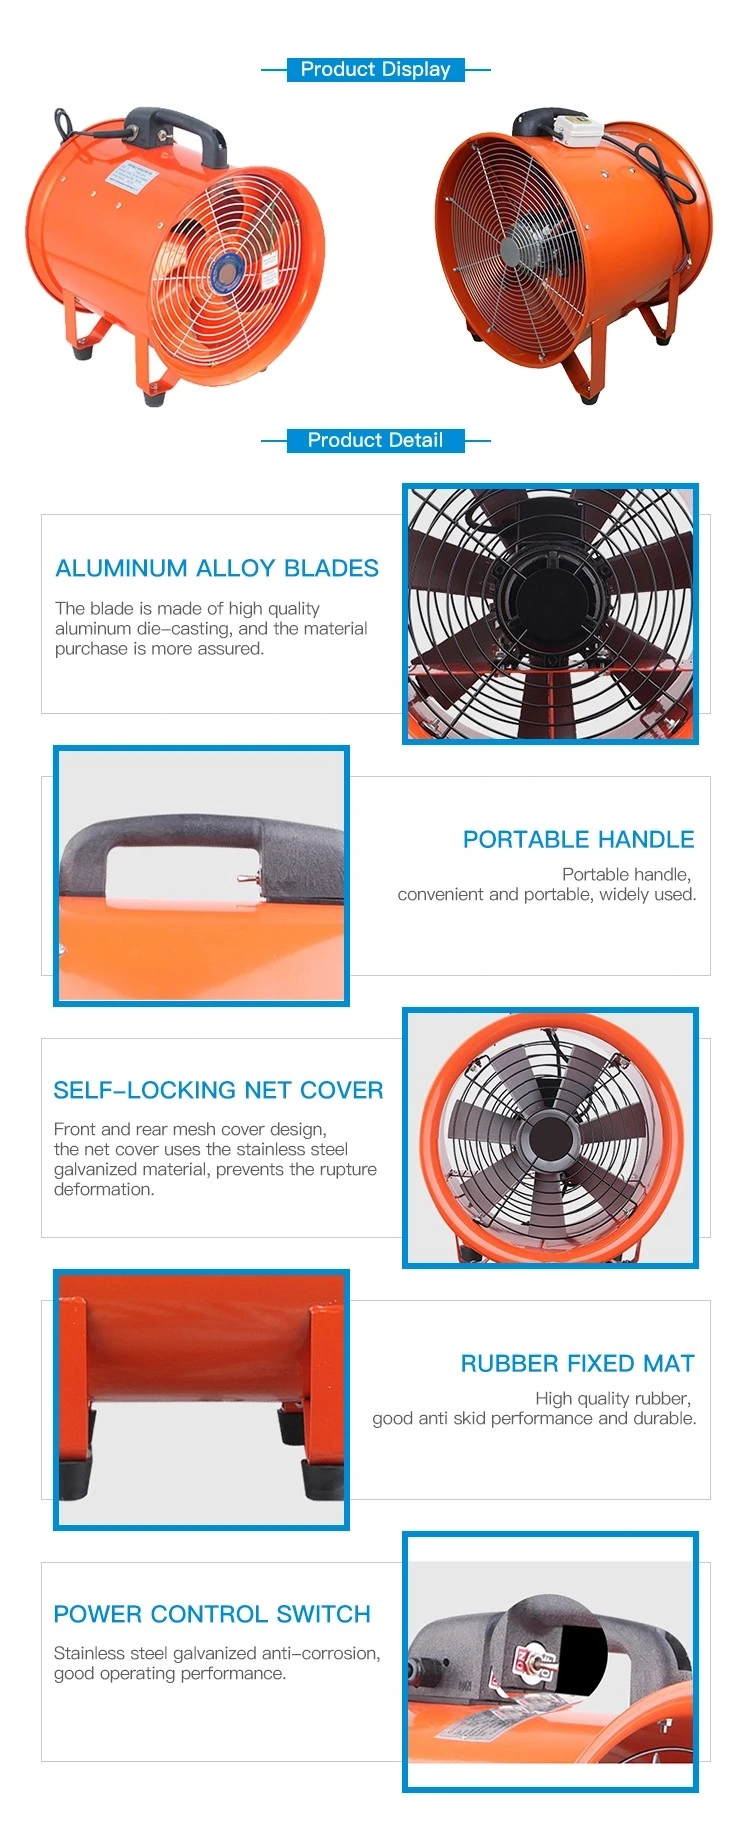 12inch 300mm Portable Axial Ventilator Blower Fans with Duct Hose